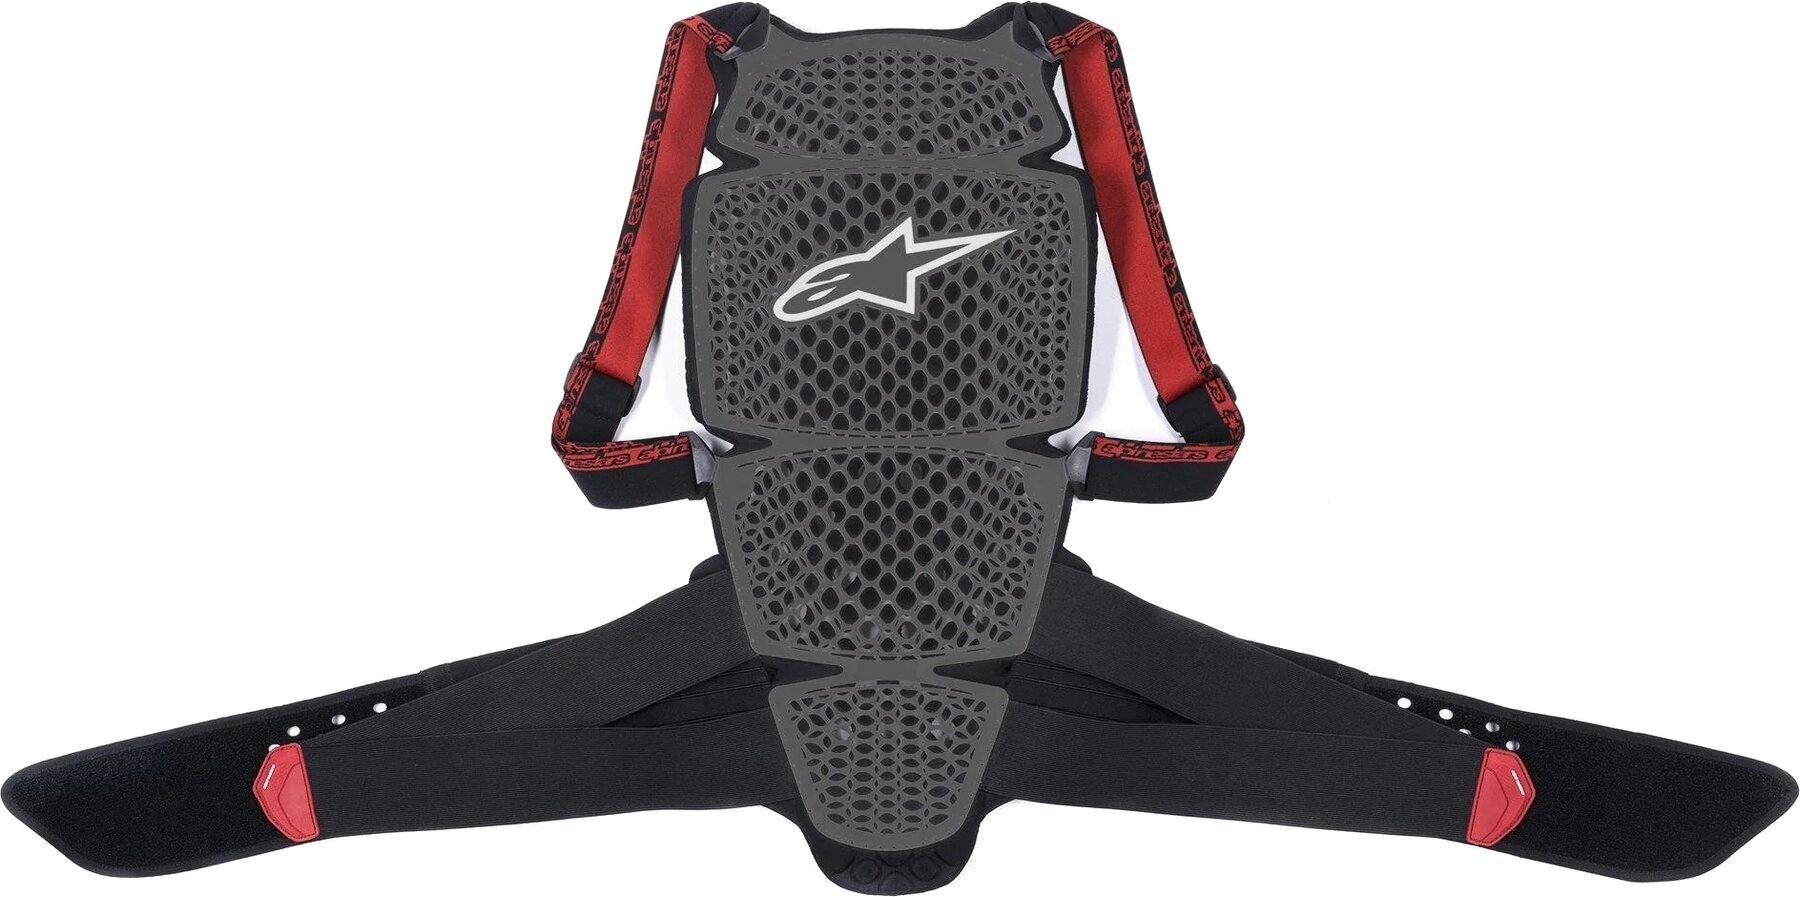 Back Protector Alpinestars Back Protector Nucleon KR-Cell Smoke Black/Red XS